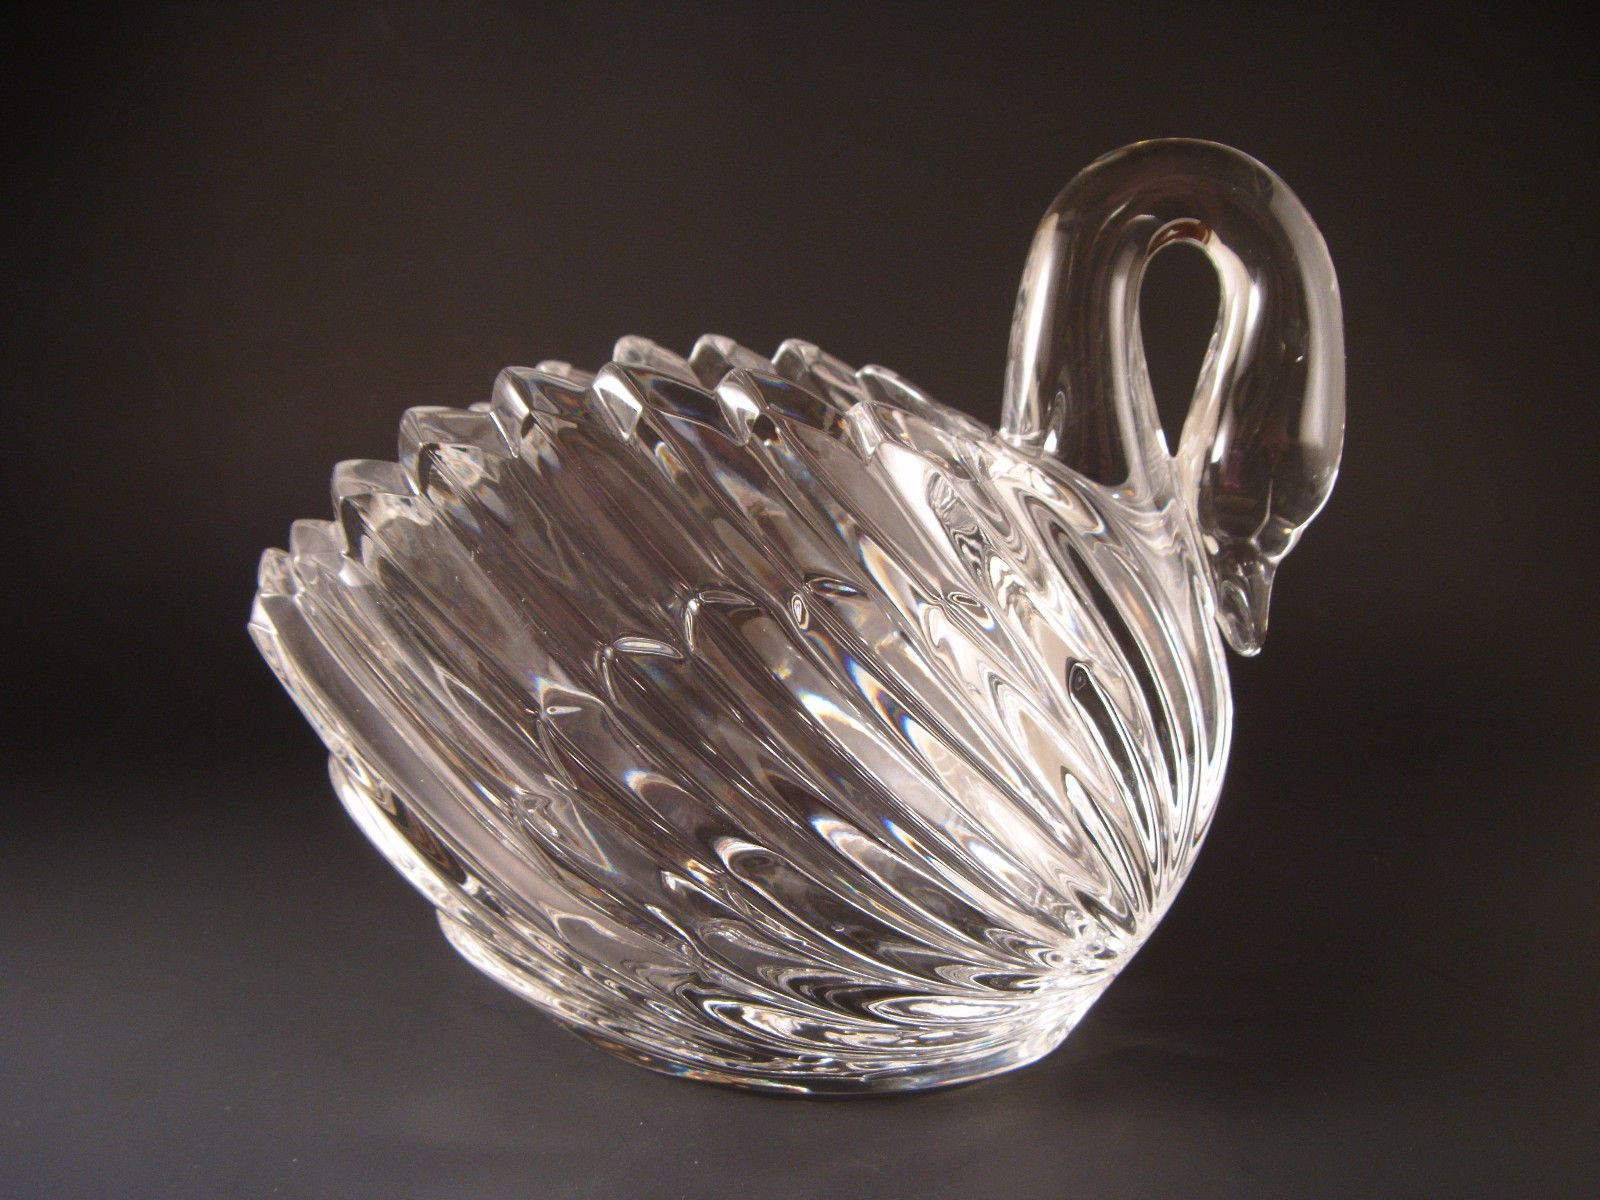 22 Amazing Cut Crystal Flower Vase 2024 free download cut crystal flower vase of nachtmann crystal swan vase bowl 6 tall lead glass germany pertaining to nachtmann crystal swan vase bowl 6 tall lead glass germany bleikristall ebay